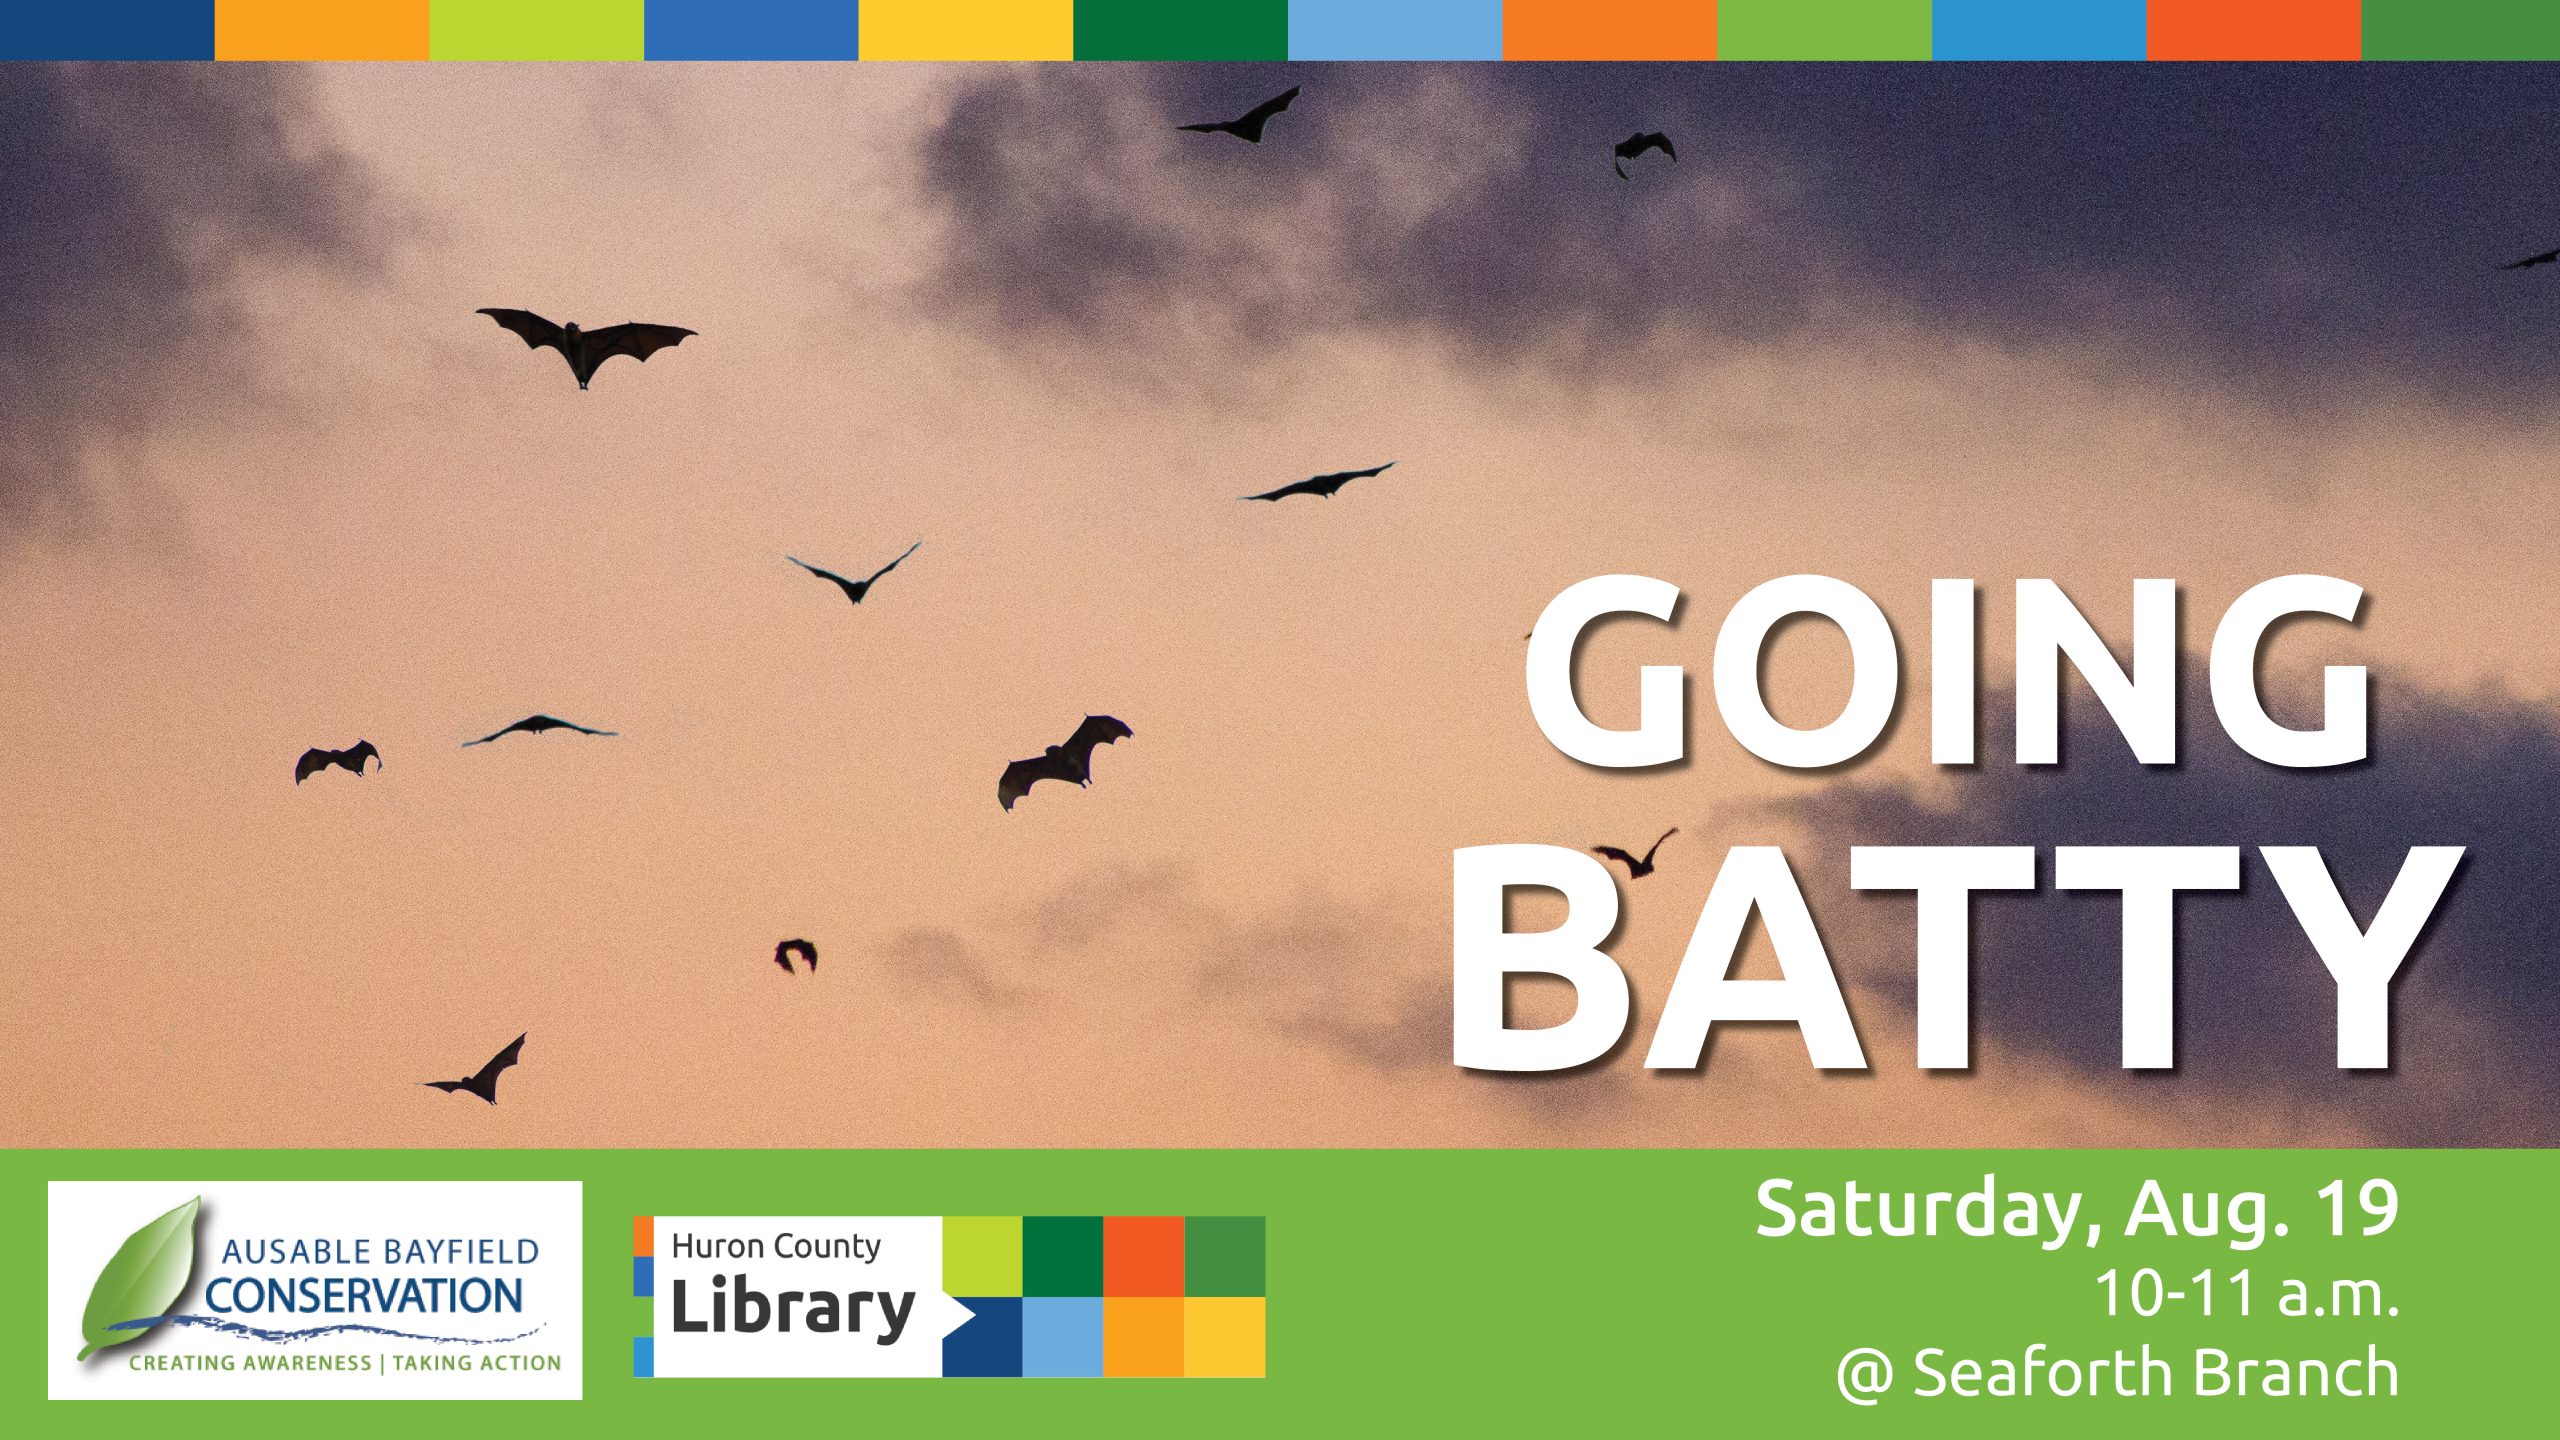 Image of bats flying at sunset with text promoting Going Batty program at Seaforth Branch